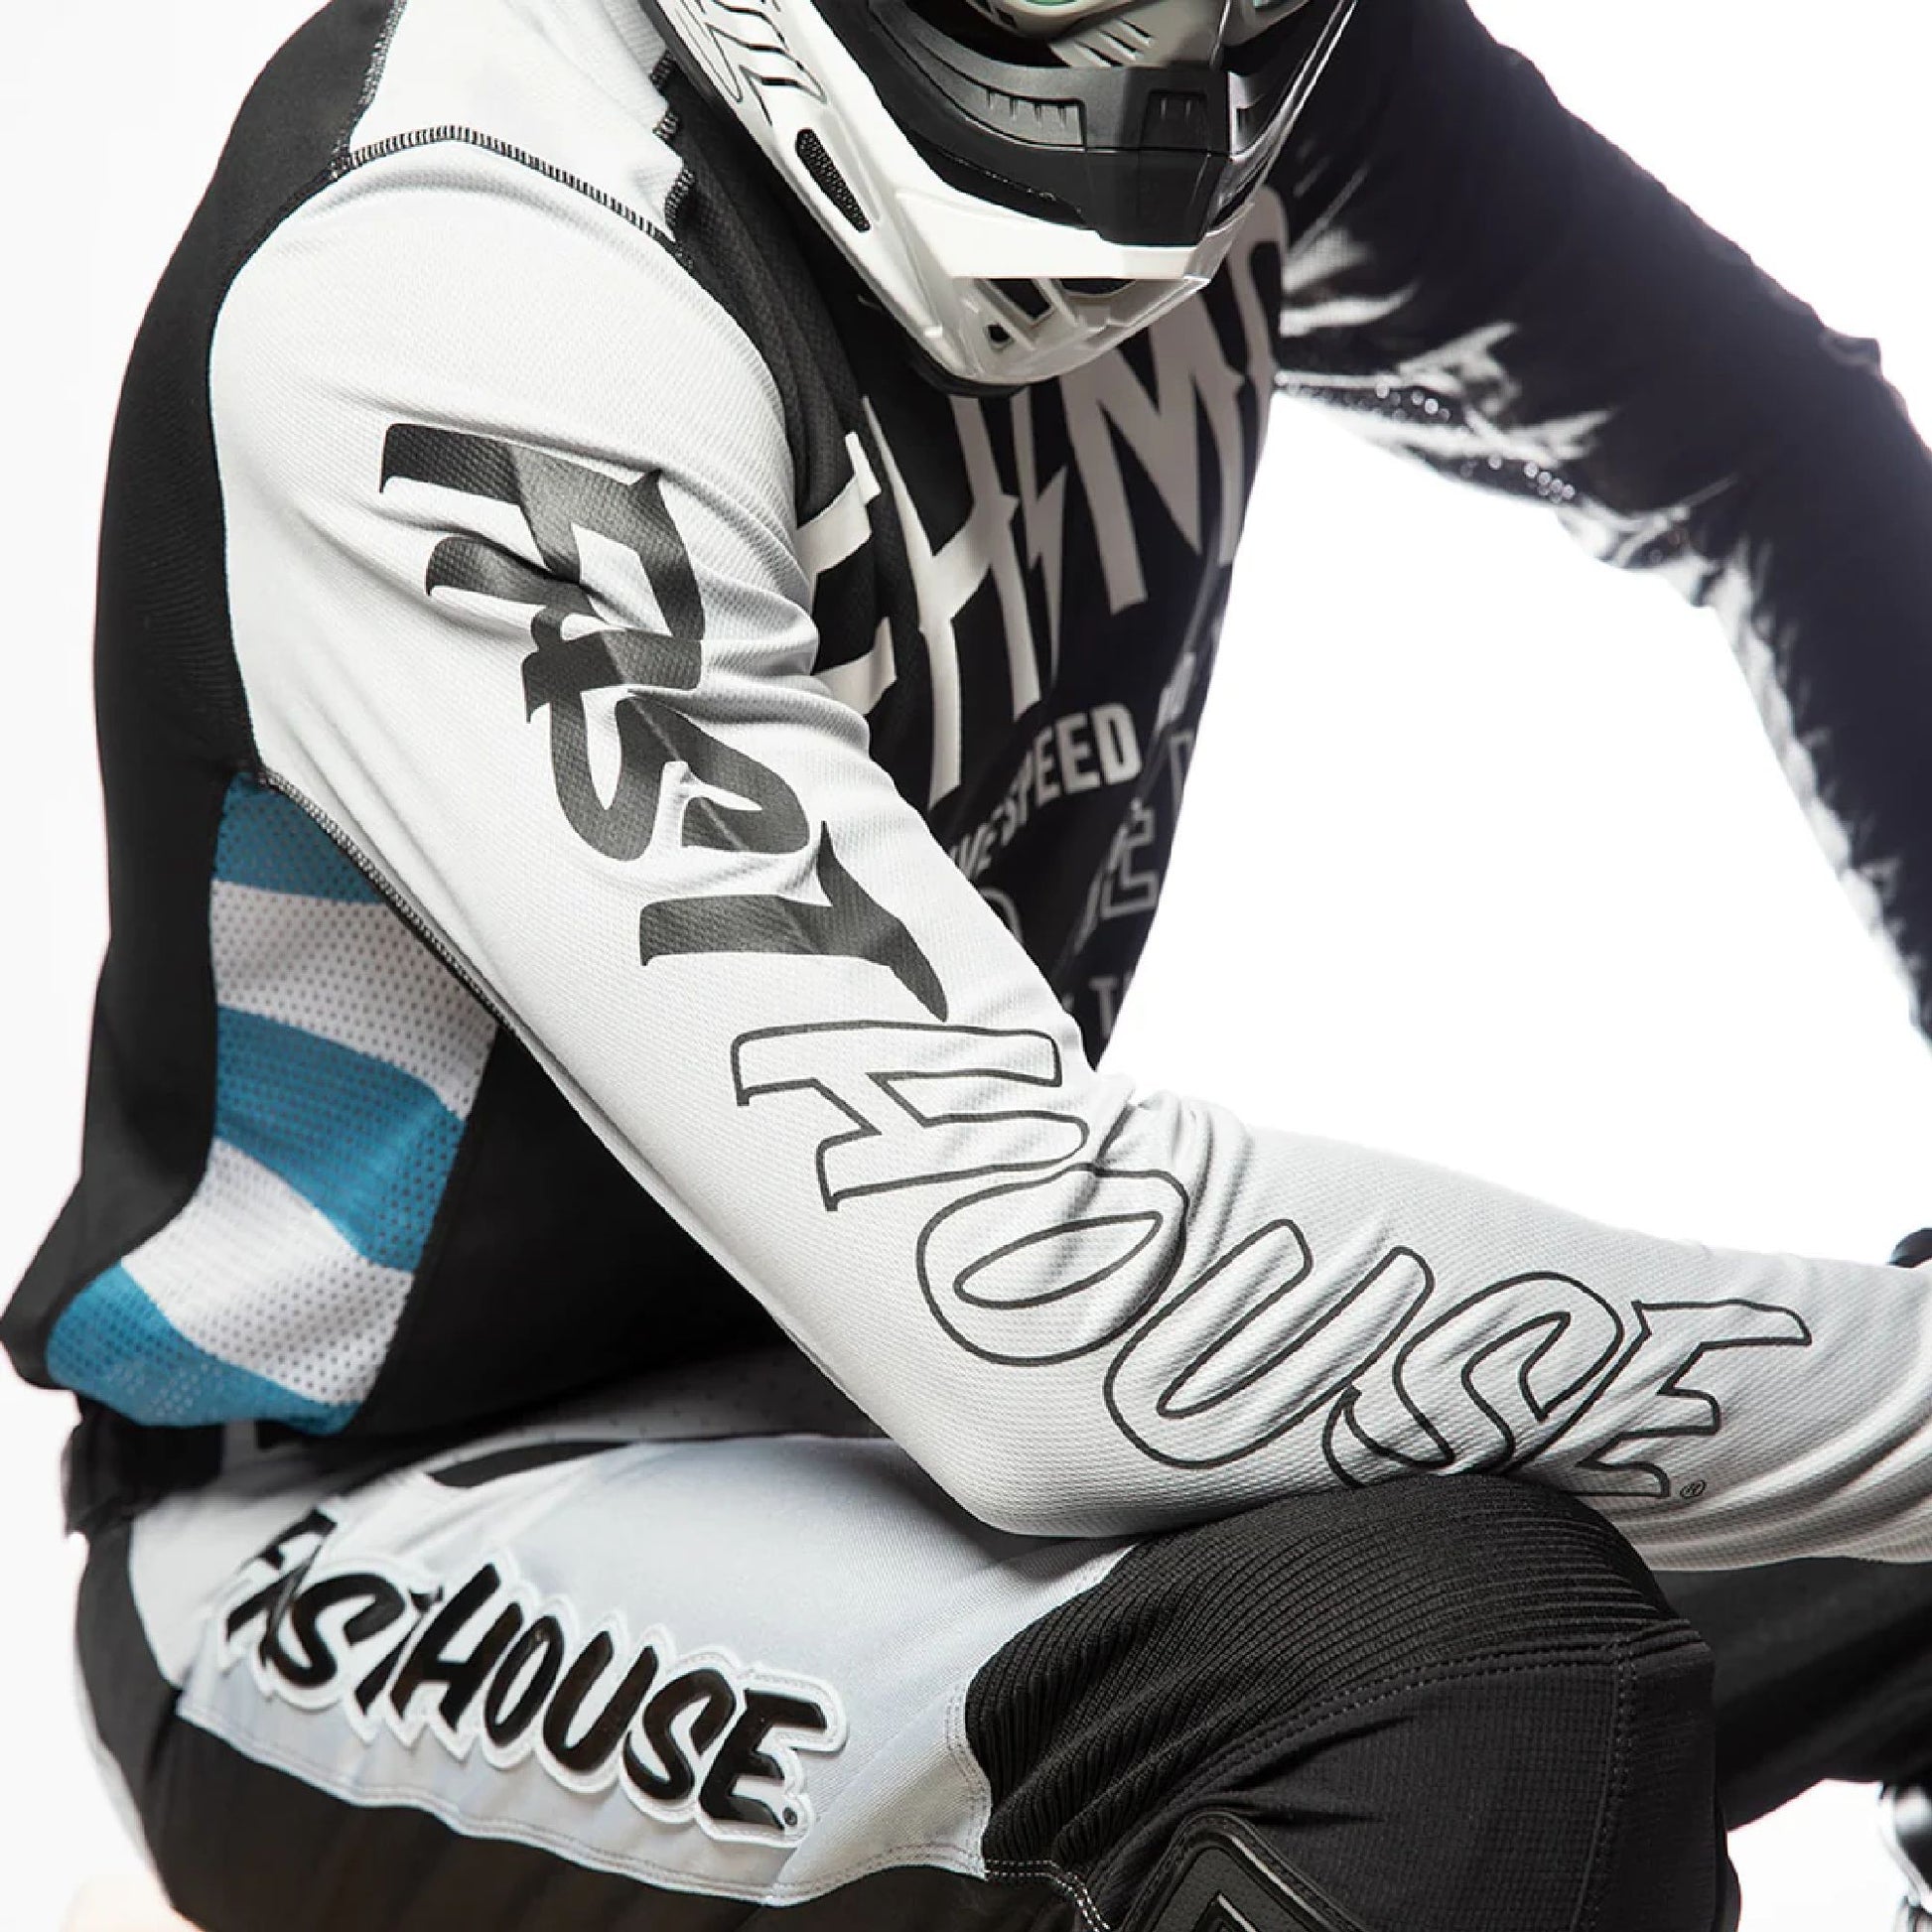 Fasthouse Grindhouse Cypher Jersey Black/Silver Bike Jerseys